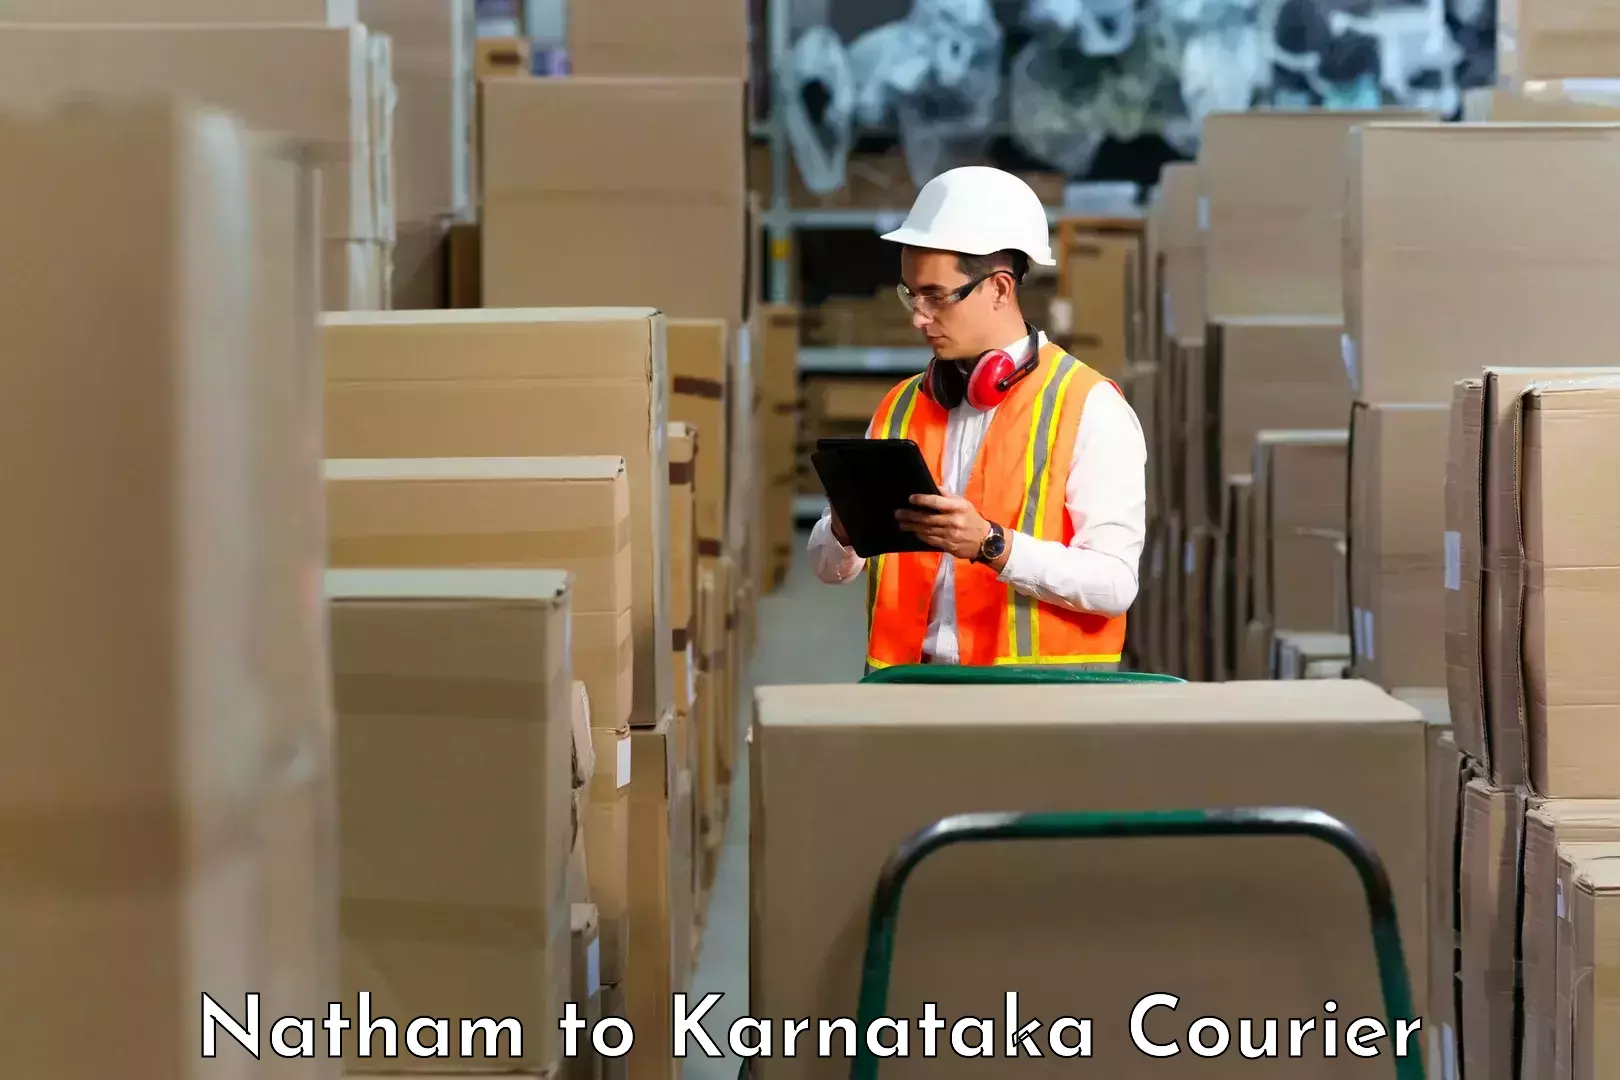 Reliable courier service Natham to Thirthahalli